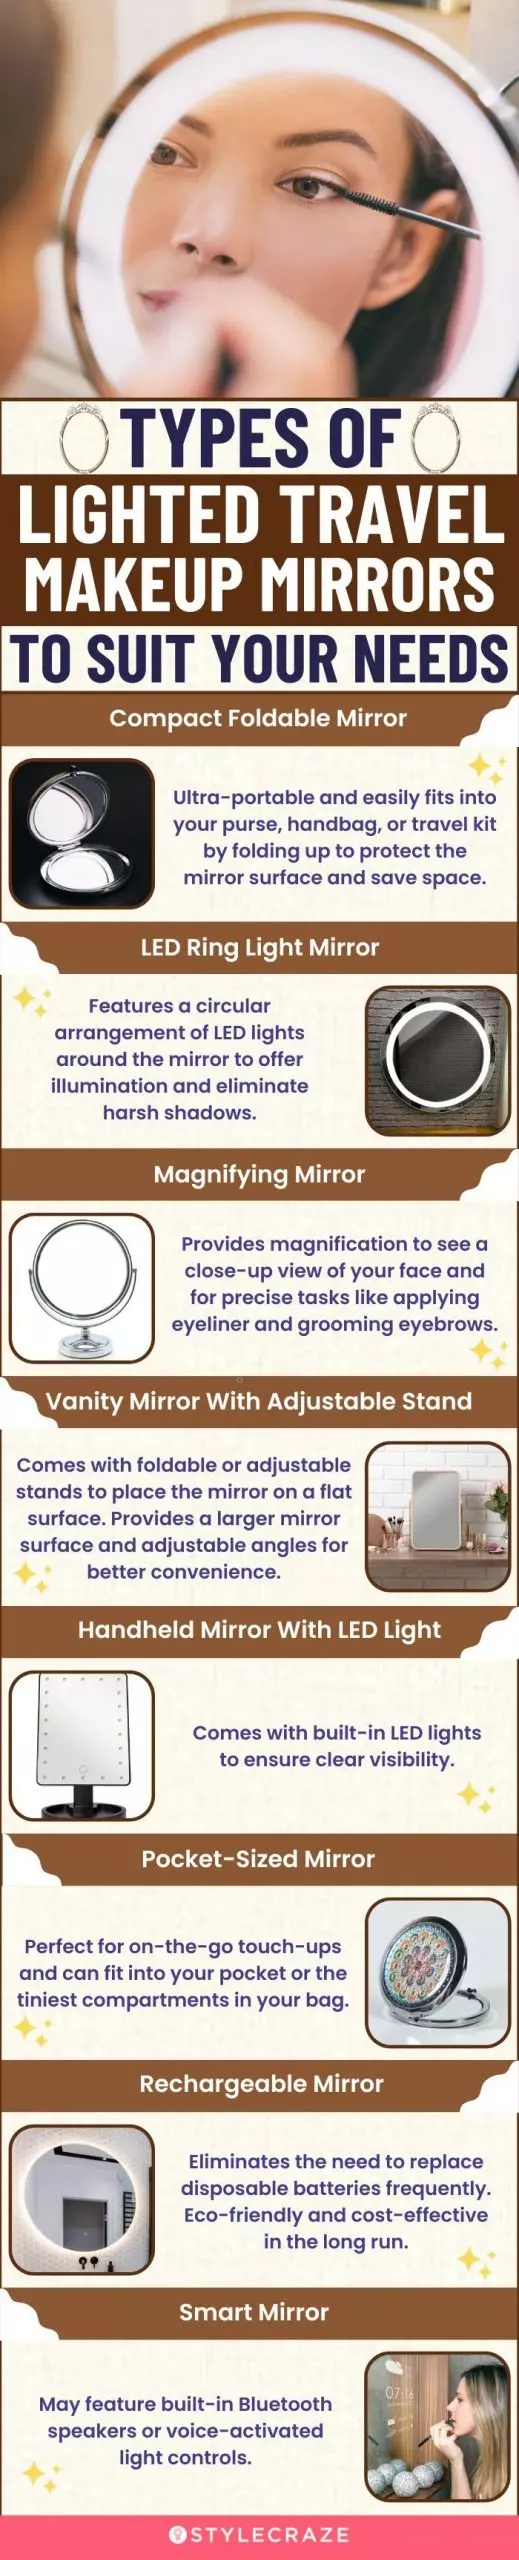 Types Of Lighted Travel Makeup Mirrors To Suit Your Needs (infographic)